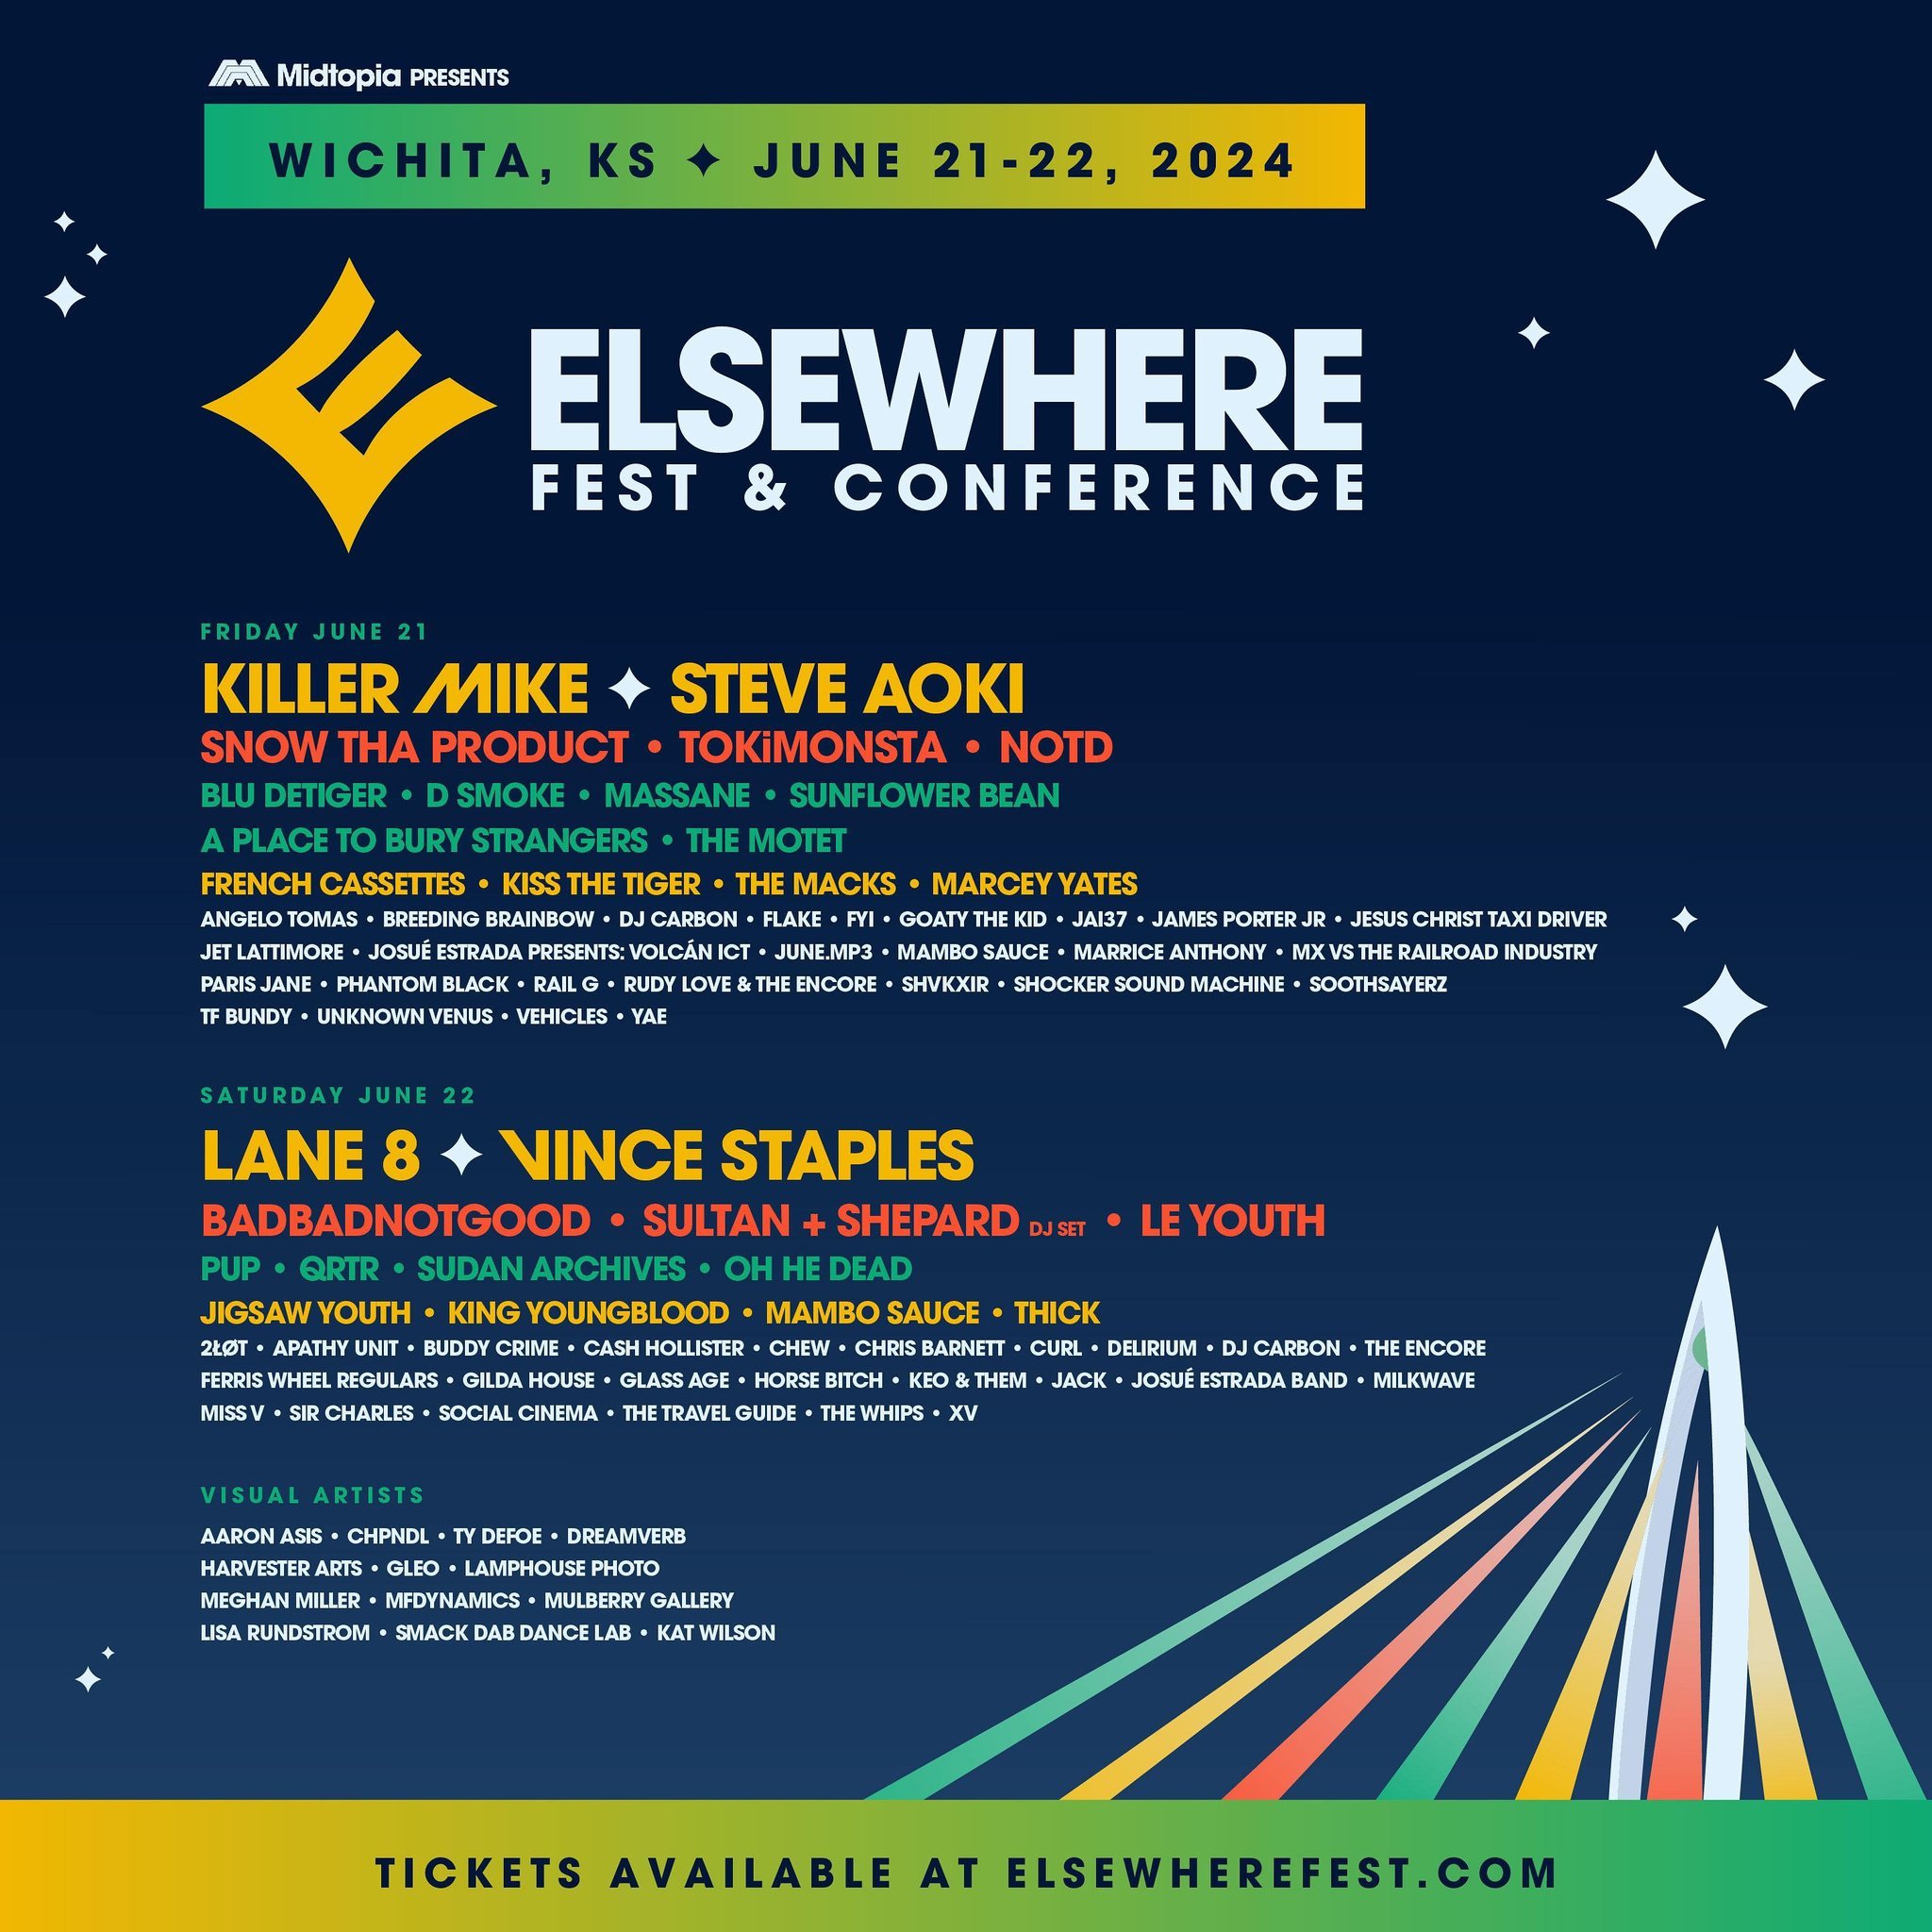 Wichita!! Beyond excited to join you for @elsewherefest with this insane lineup of musicians on June 21. Tickets on sale this Friday at 10am CST ✨ In the meantime, we&rsquo;ll be kicking it in the northeast for the next two weeks, starting tonight in